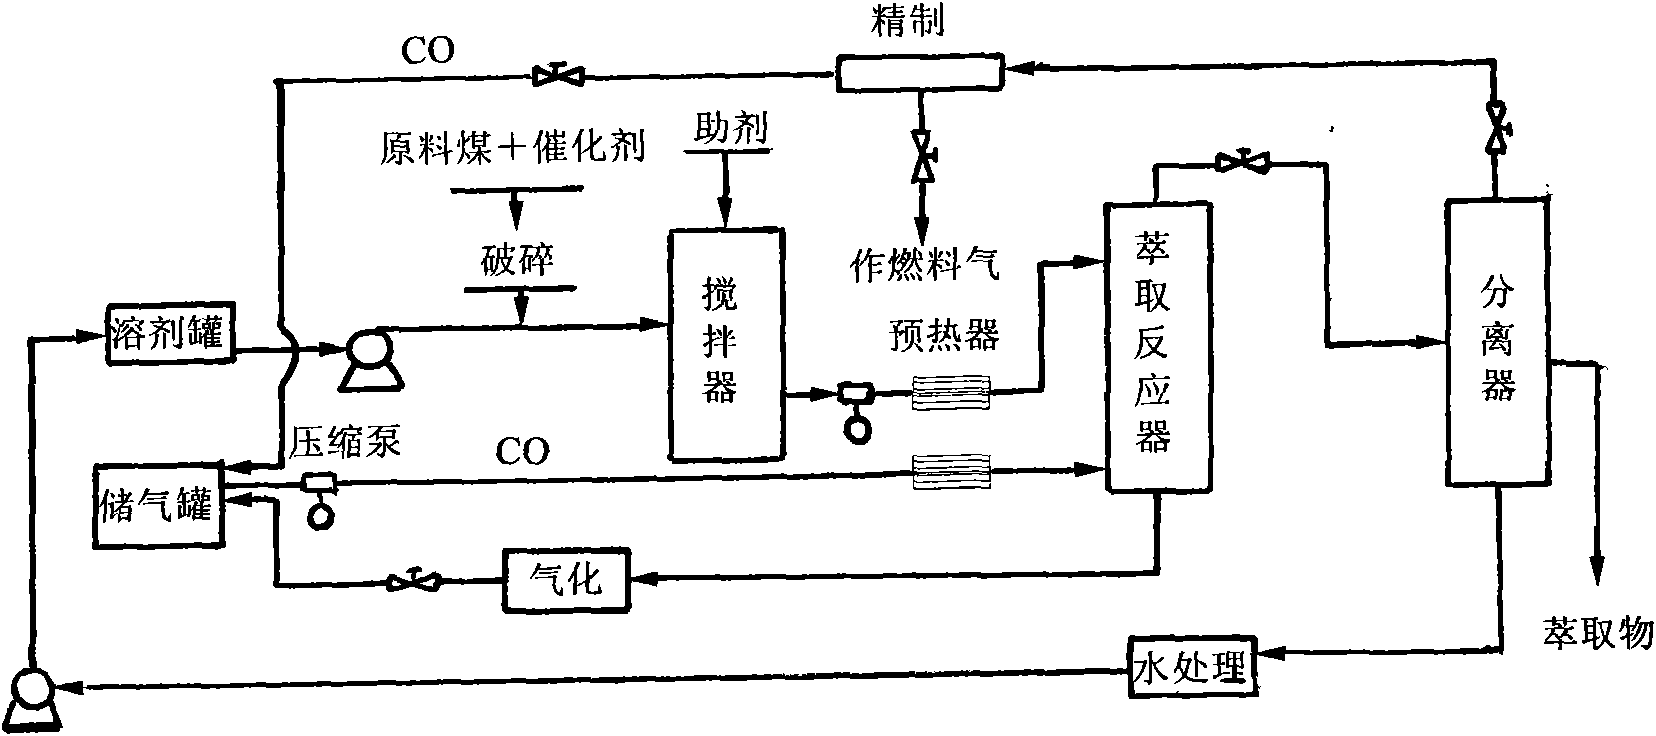 Method for directly liquefying coal in CO and H2O system